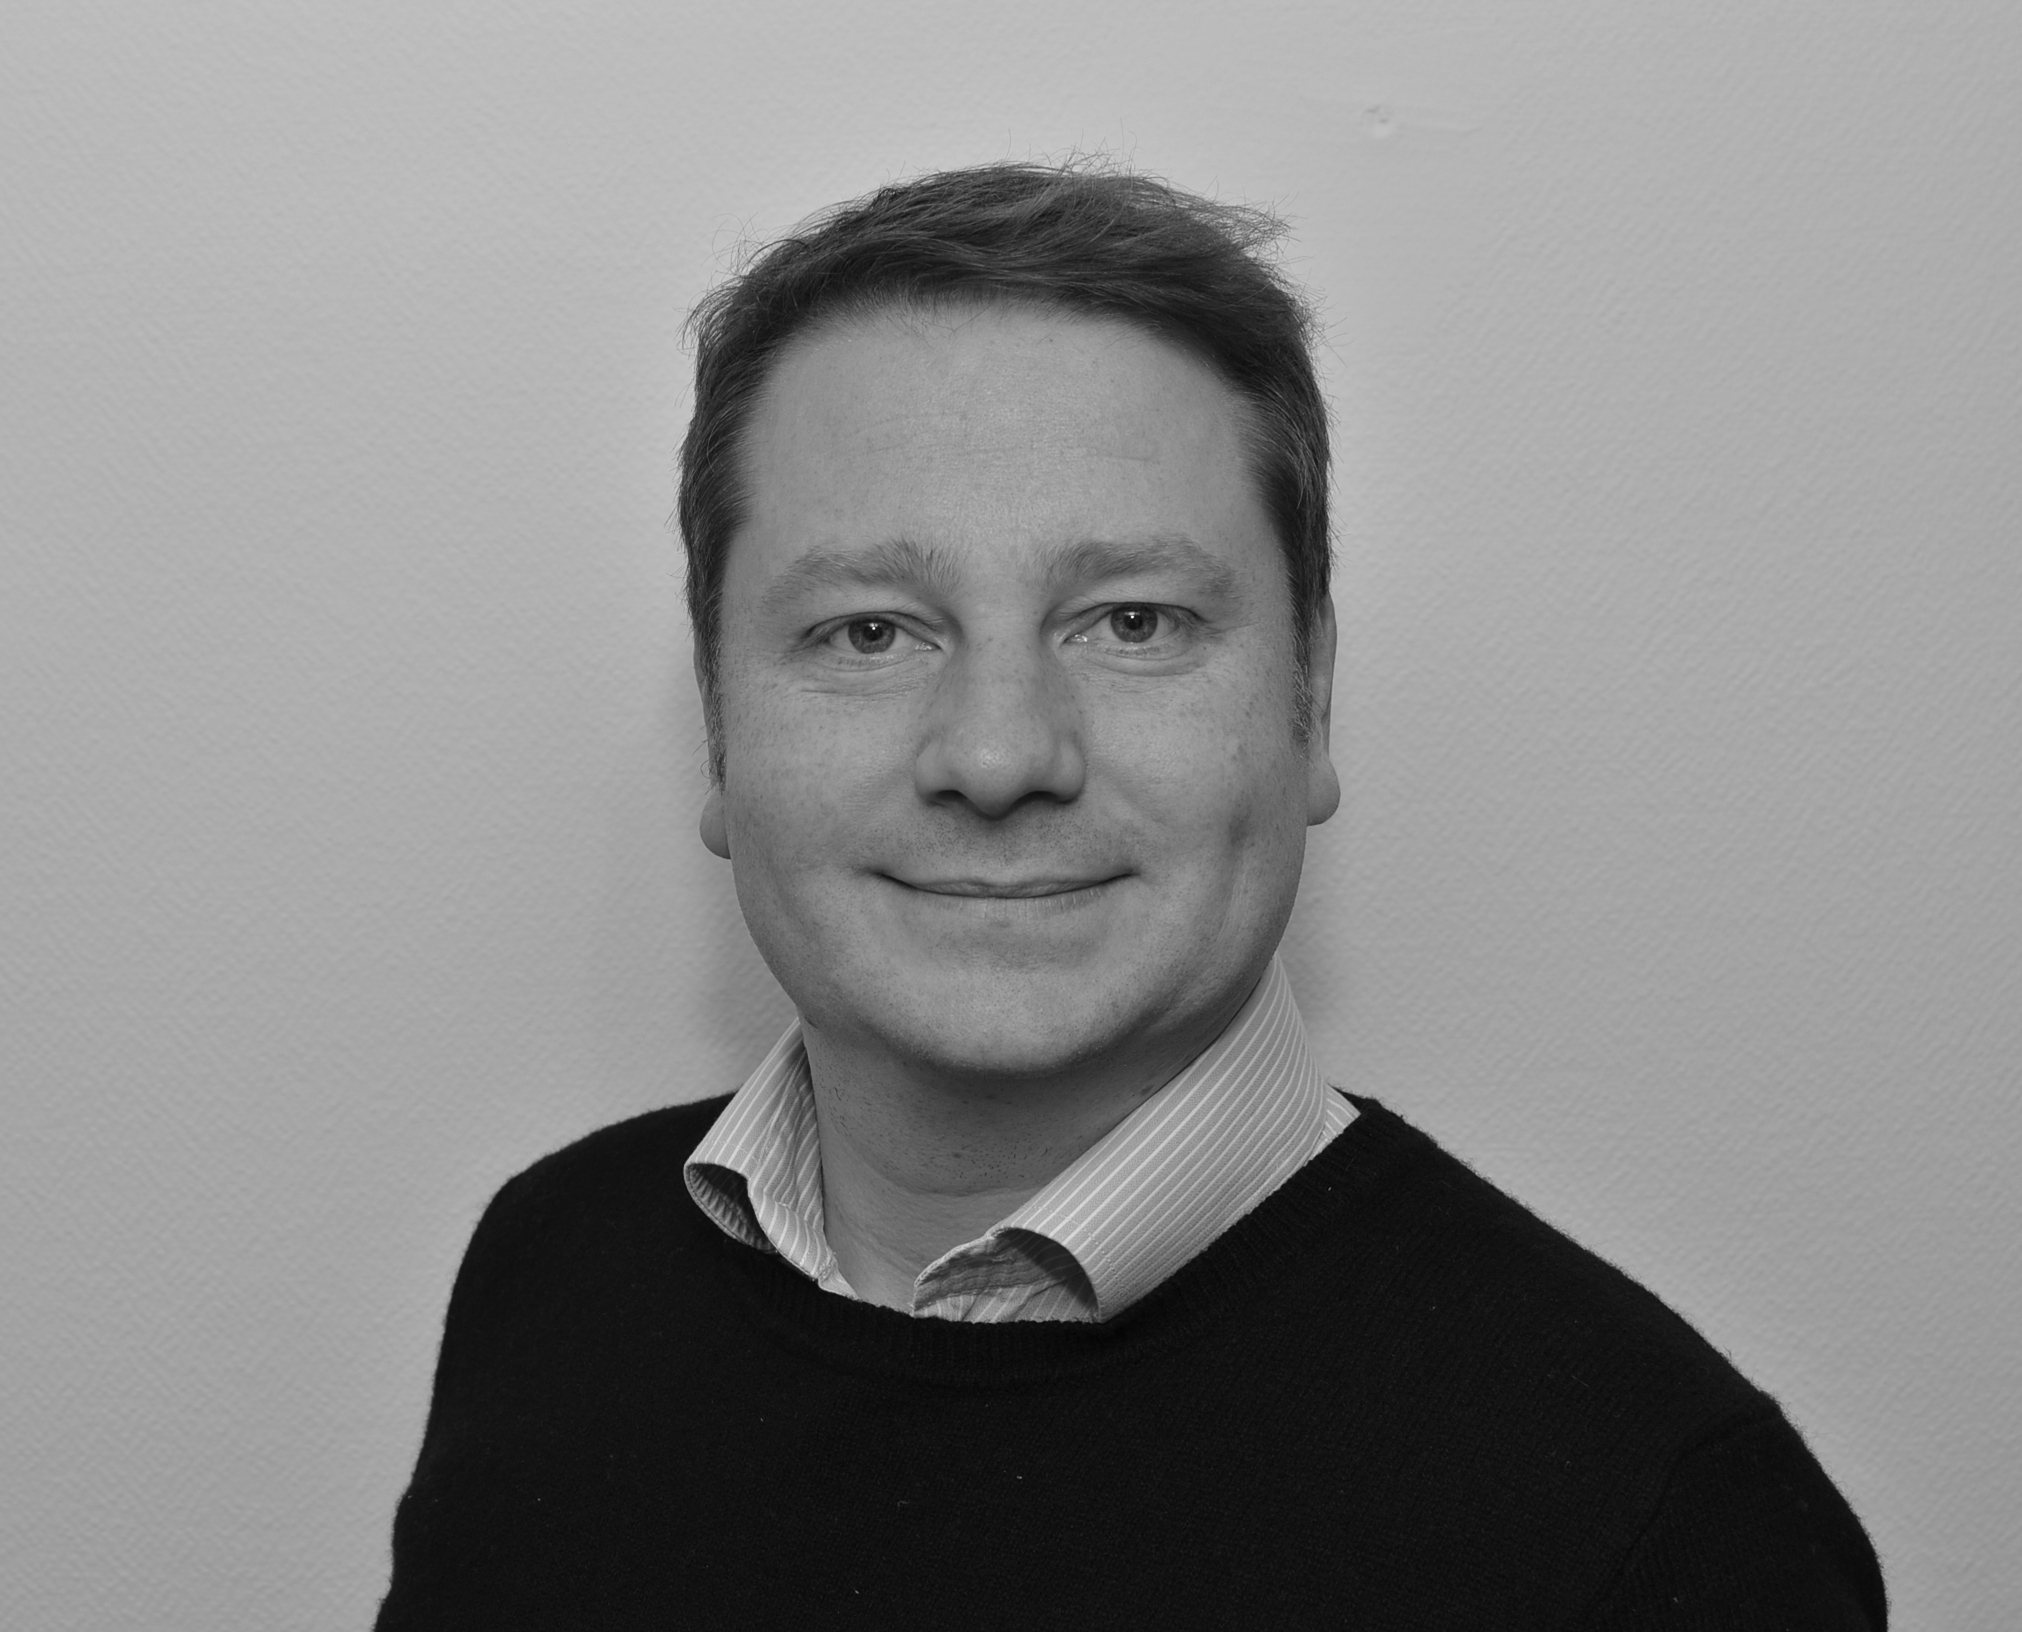 Will Litherland, COMPANY & SALES DIRECTOR